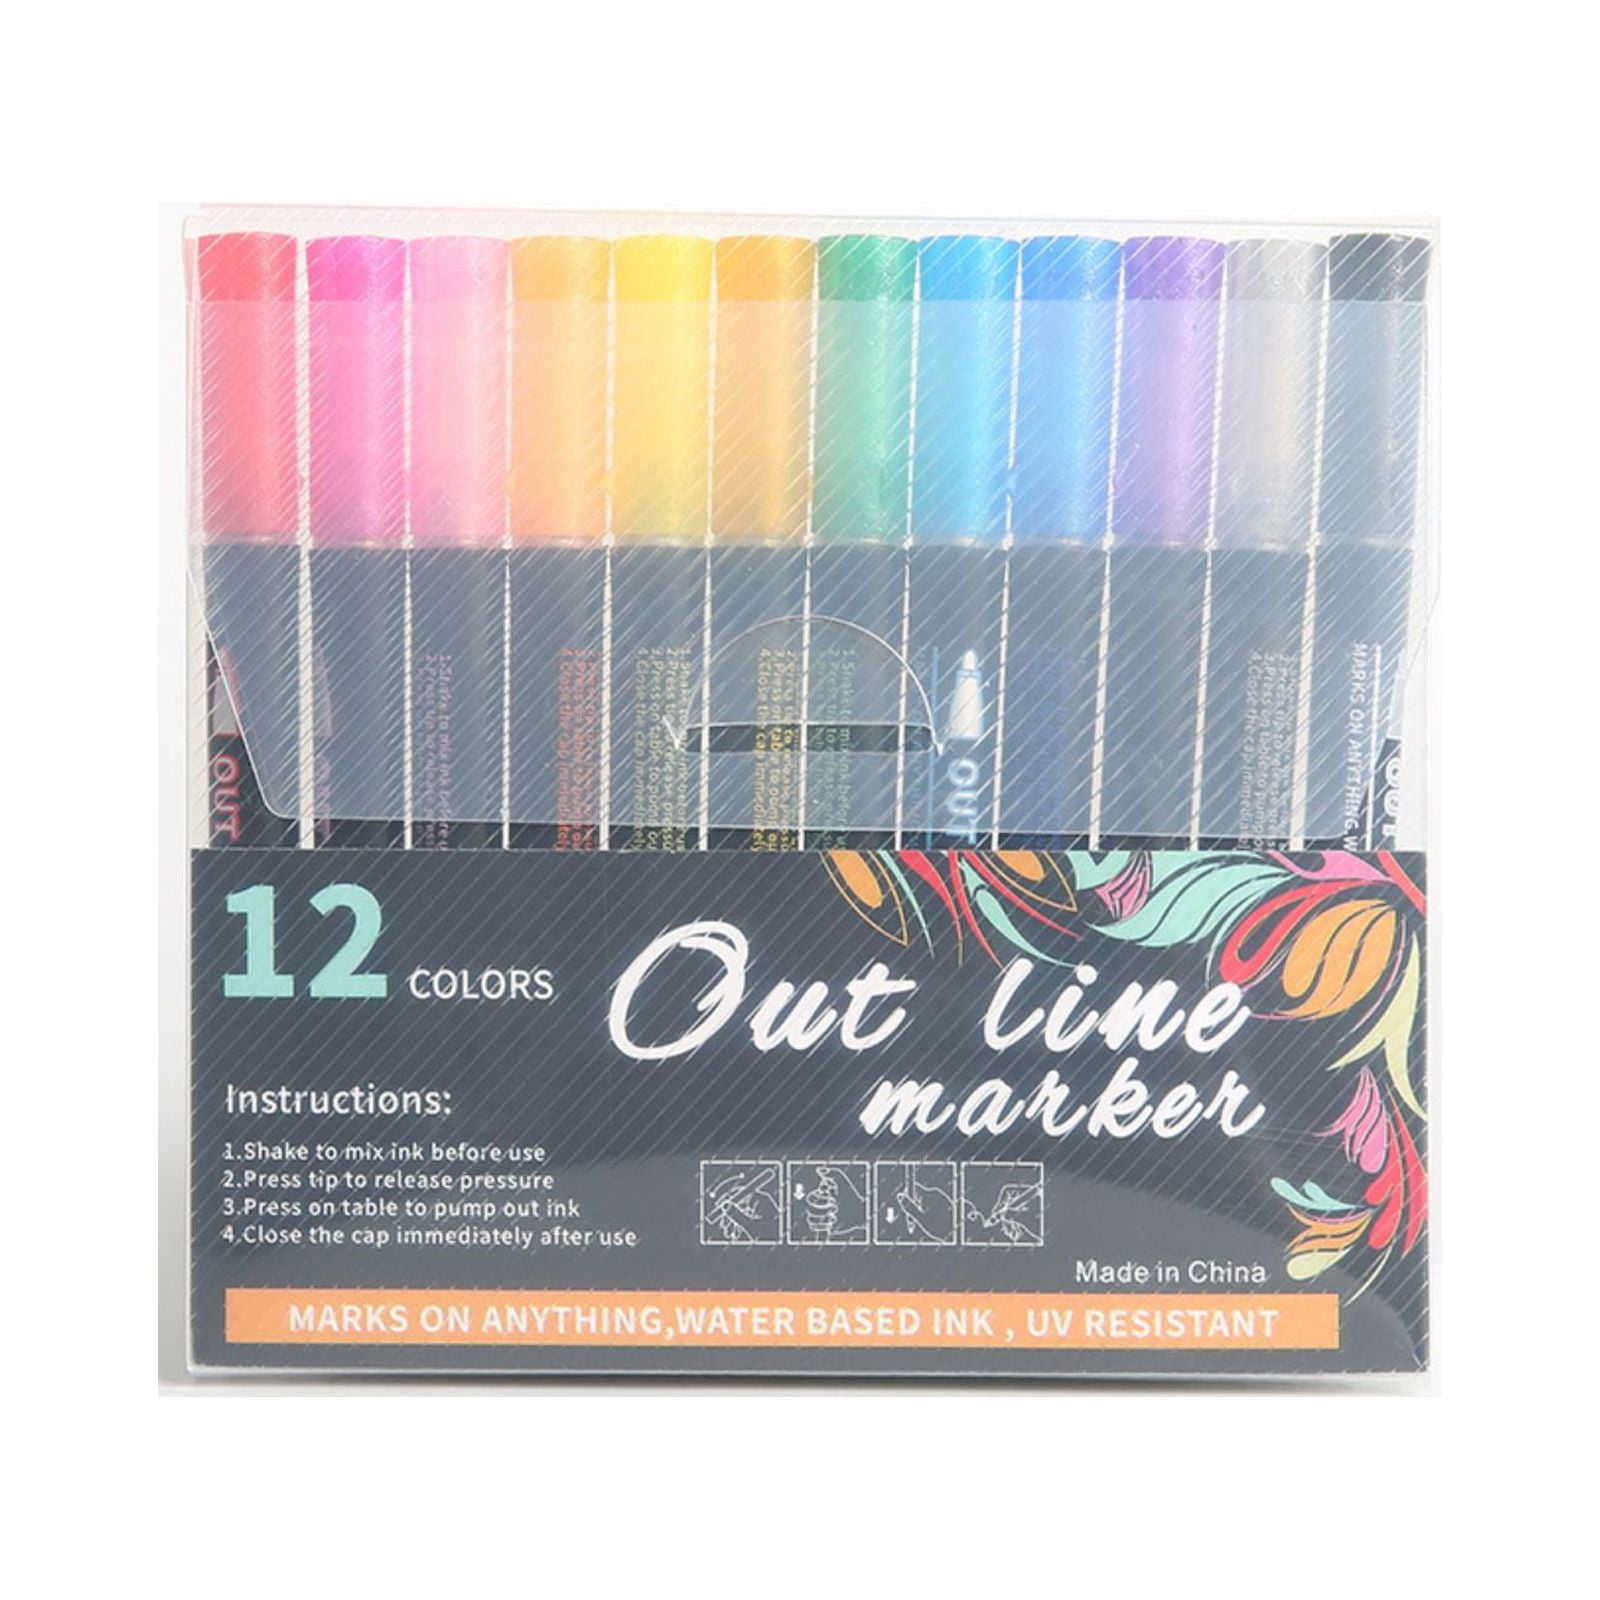 Wholesale Glitter Double Line Pen For Gift Card Writing, Drawing, DIY Art  Crafts Toolstation Fluorescent Tubes Outline Marker Pens 201222 From  Kong09, $9.11